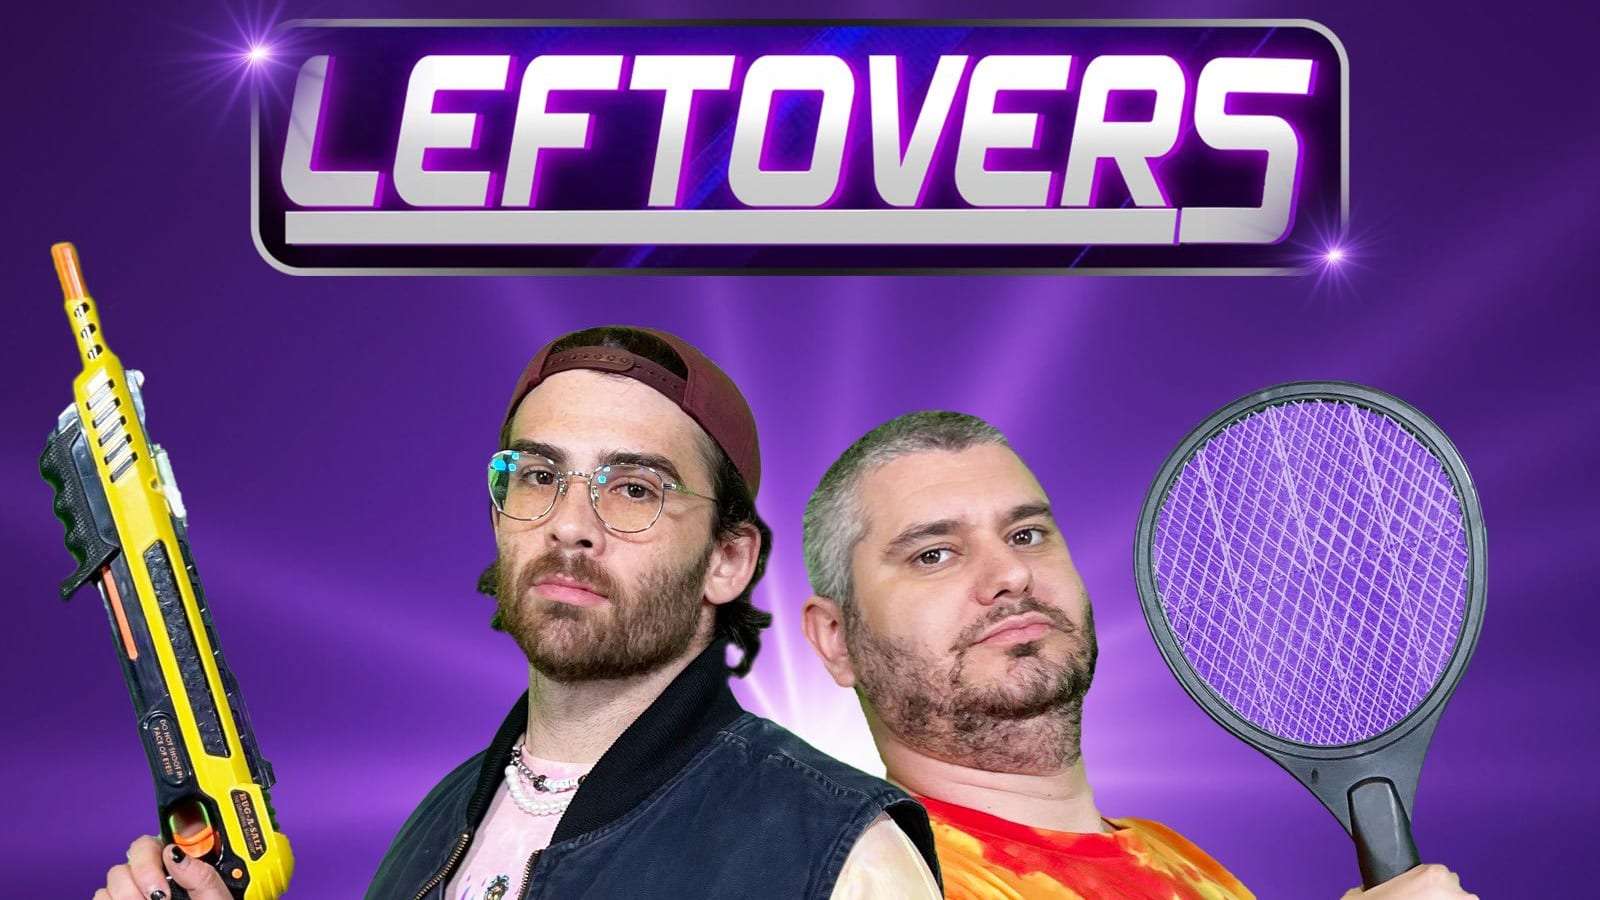 Leftovers Podcast with Hasan Piker and Ethan Klein H3H3